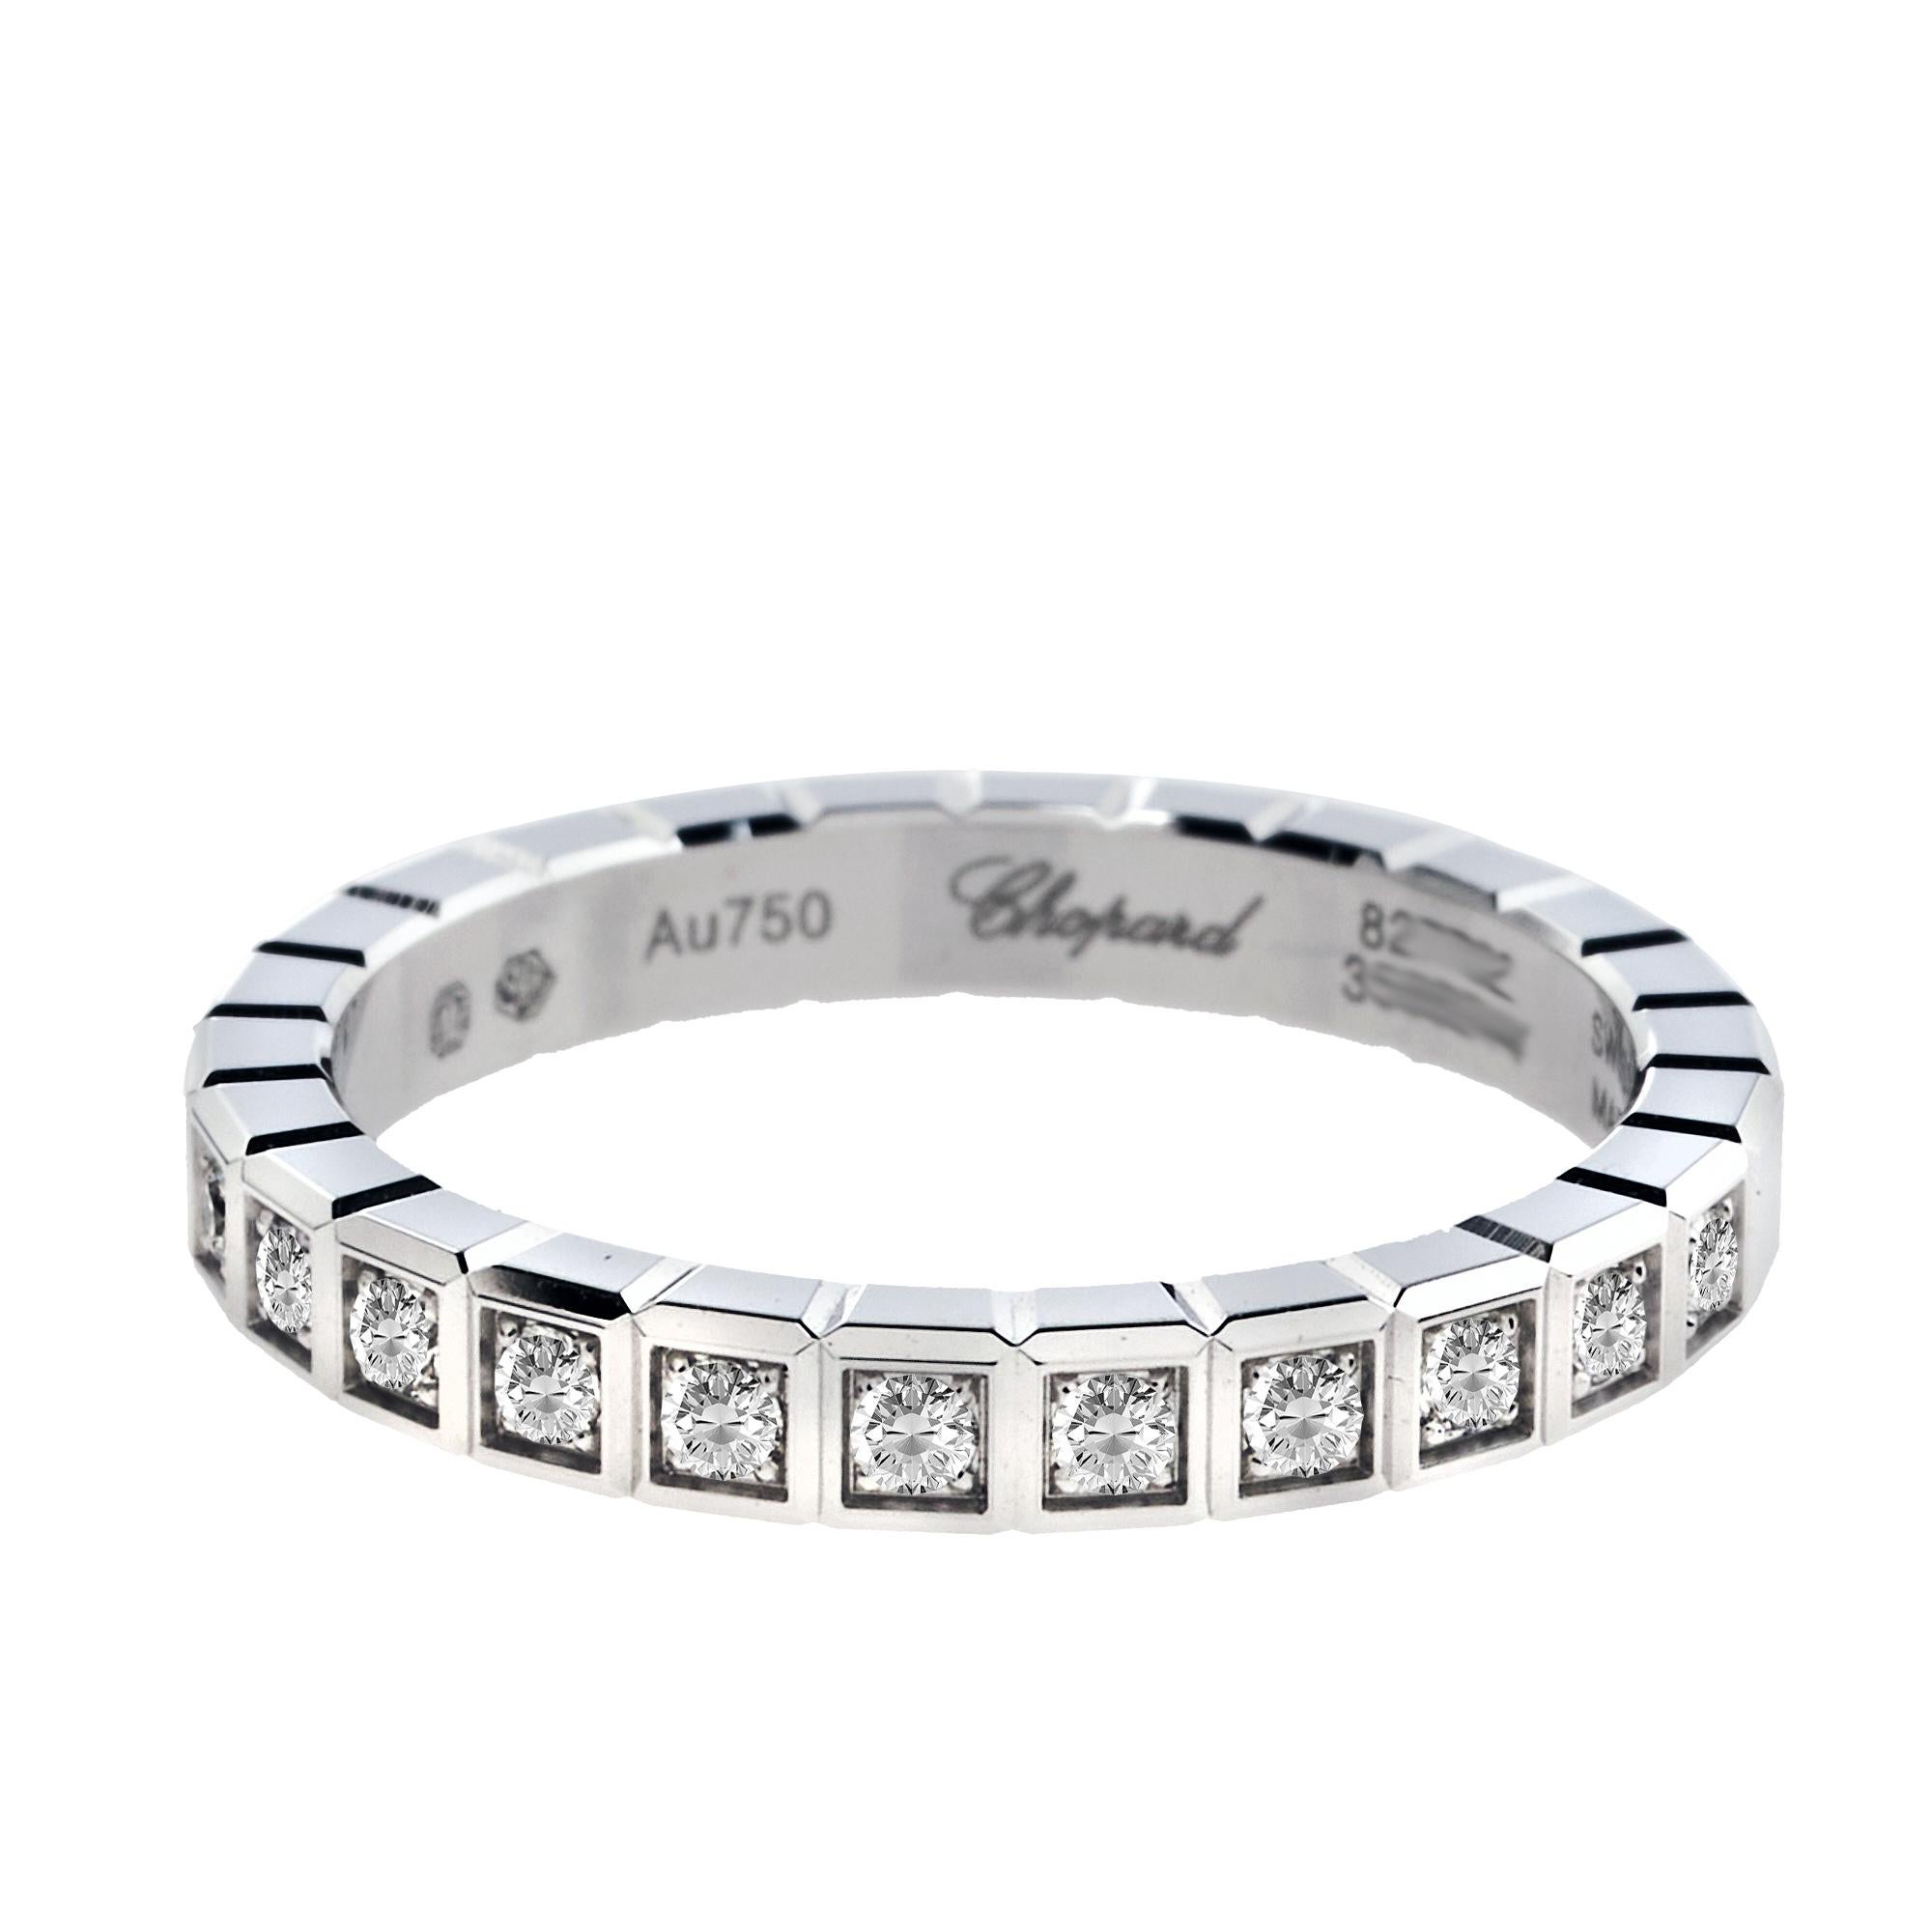 Classic and luxurious, this tasteful Chopard Ice Cube ring showcases modern aesthetics inspired by small blocks of ice. Fashioned in 18k white gold and studded with brilliant-cut diamonds on half of the shank, this stunning ring is the epitome of